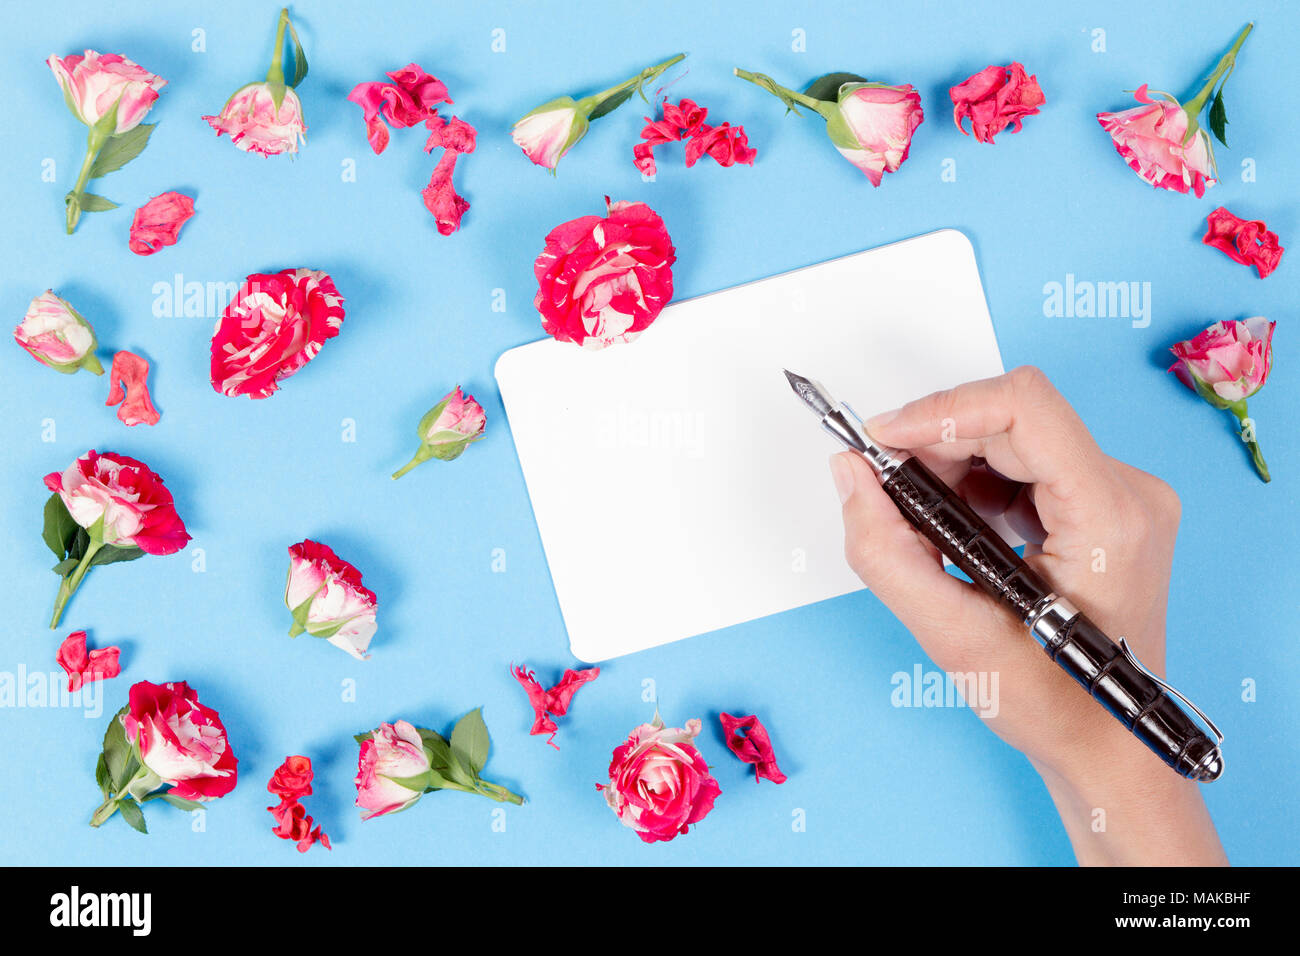 Woman hand writing on blank card.Fresh roses on blue background Stock Photo